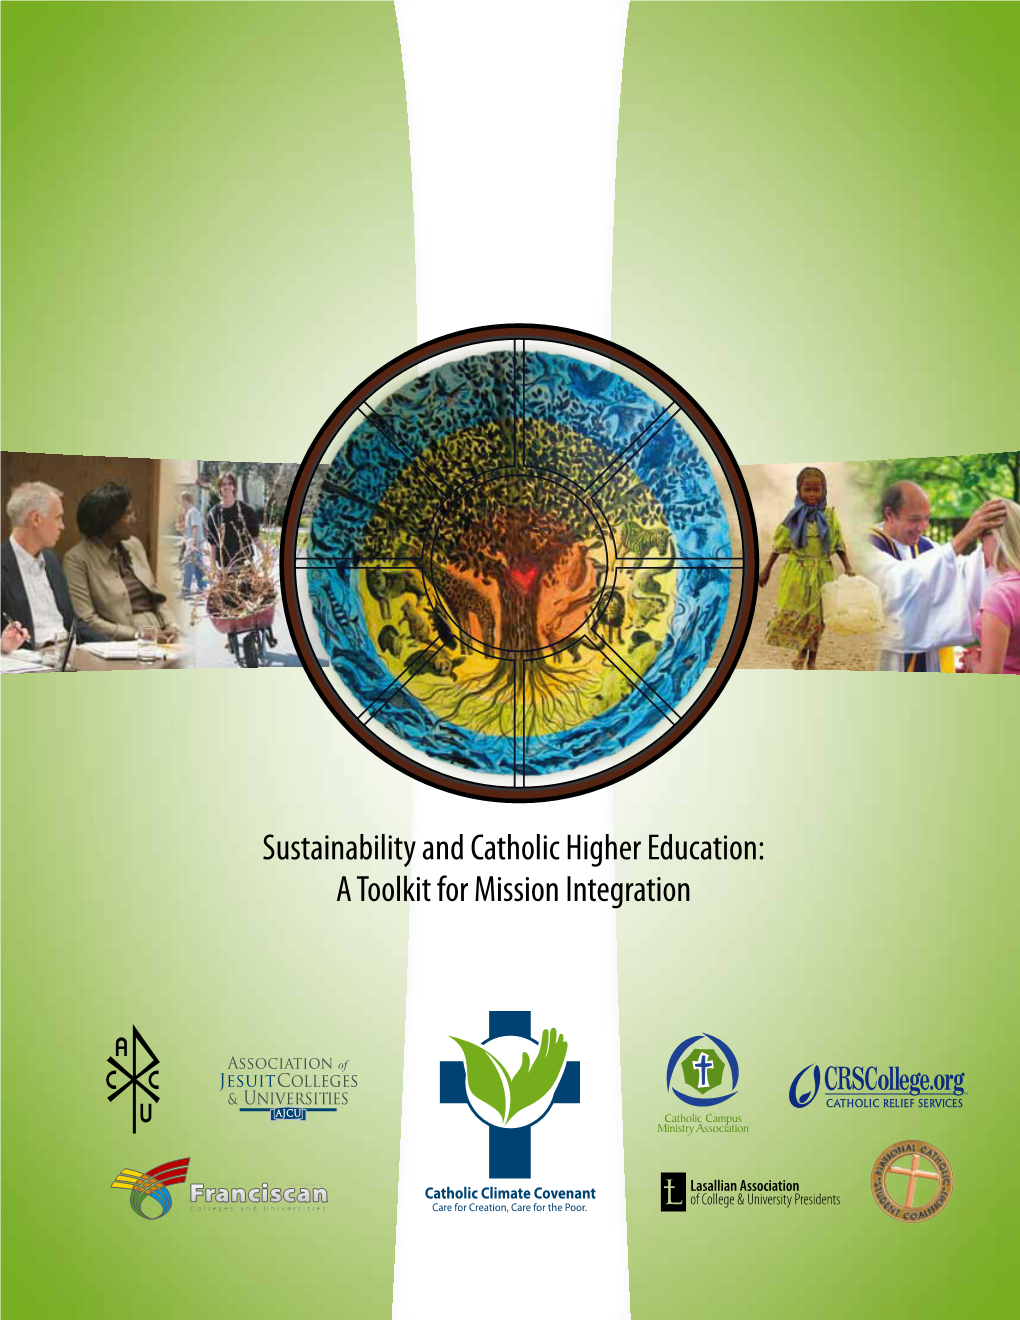 Sustainability and Catholic Higher Education: a Toolkit for Mission Integration